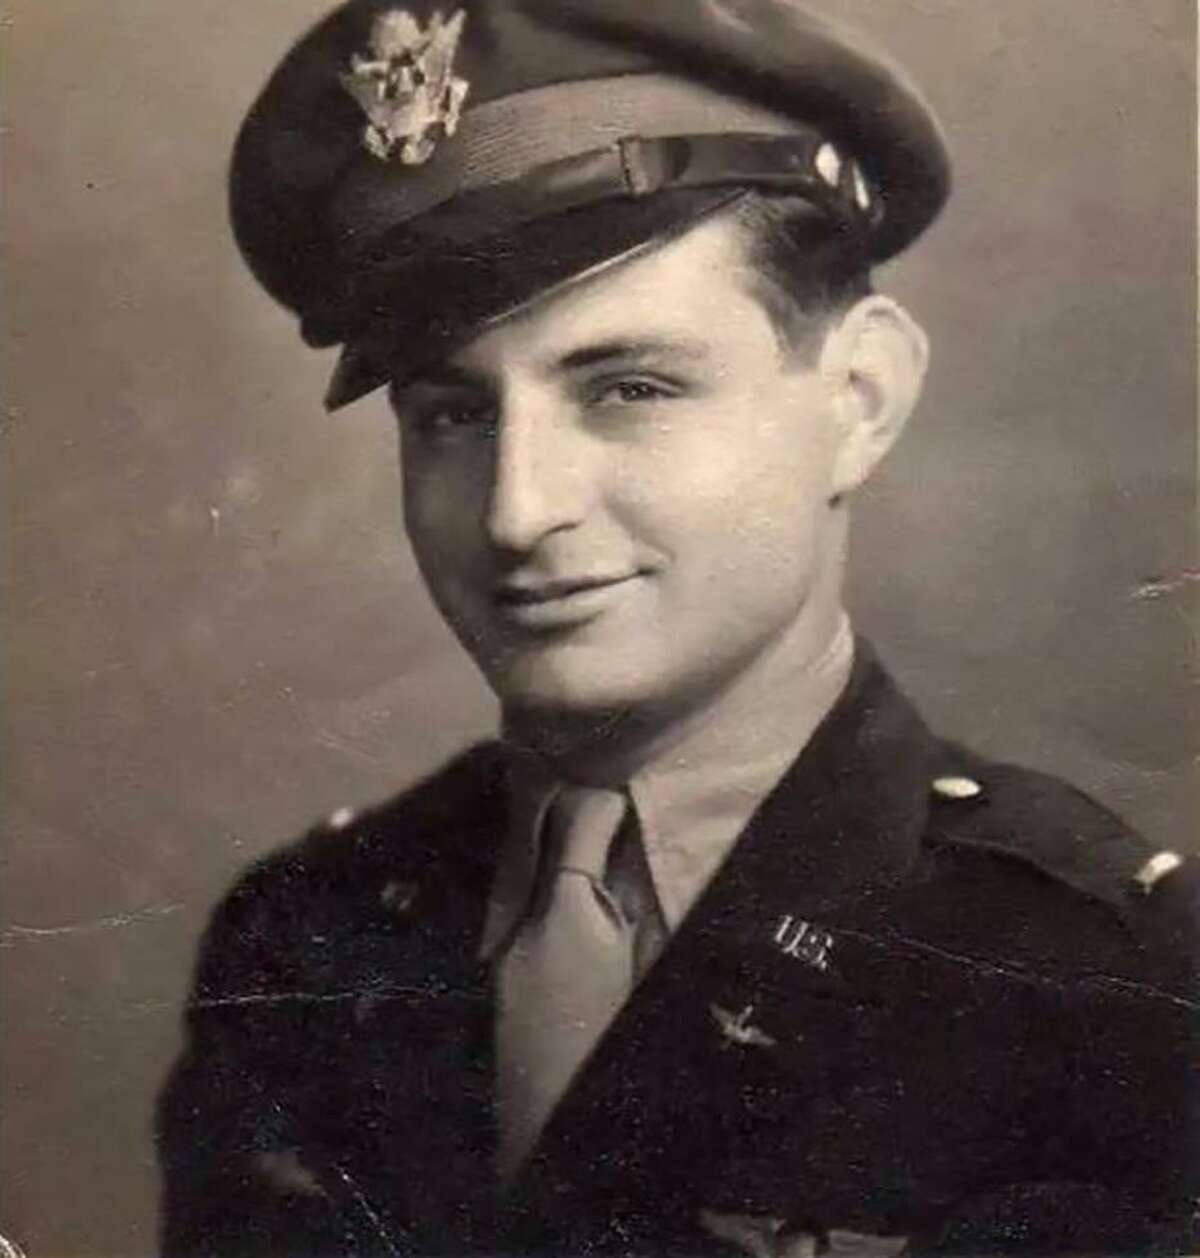 First Lt. Louis V. Girard was 20 when he was listed as missing in action in the disastrous U.S. bombing raid on oil refineries in Ploesti, Romania, in 1943. His remains were identified using DNA analysis and he will be buried June 4 in his hometown of West, Texas.